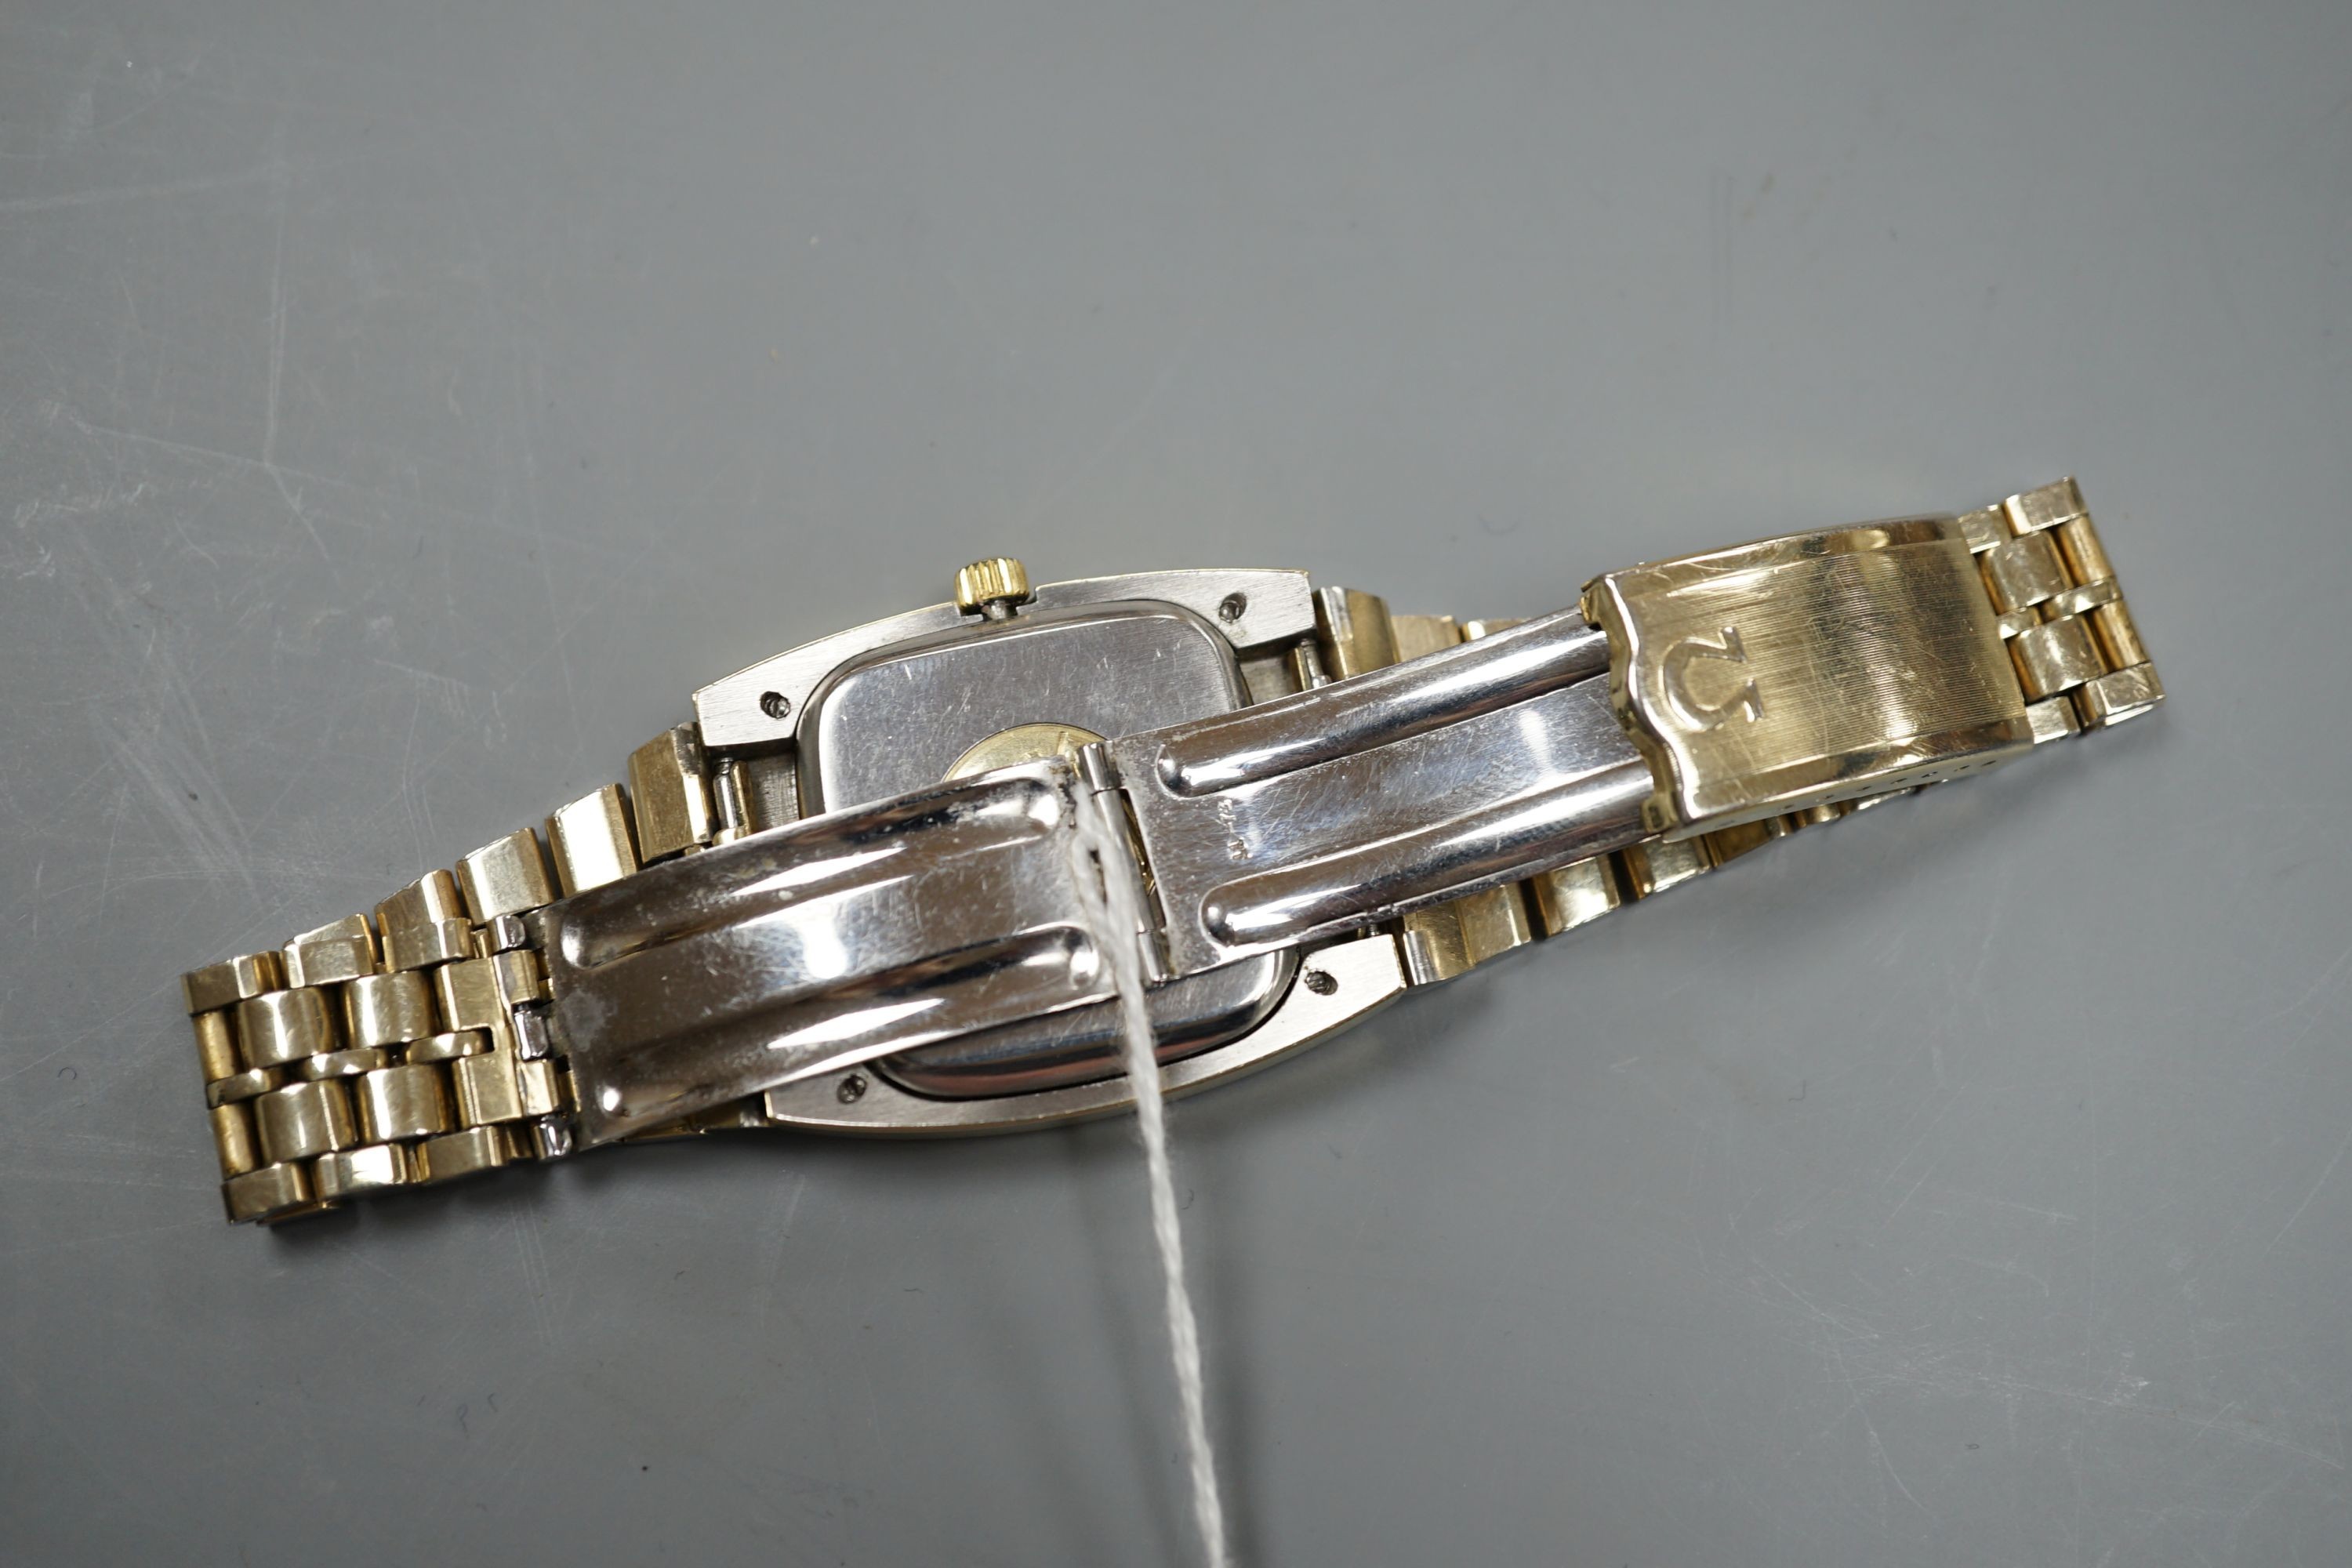 A gentleman's steel and gold plated Omega Constellation automatic wrist watch, on a steel and gold plated Omega bracelet, case diameter 34mm, no box or papers.